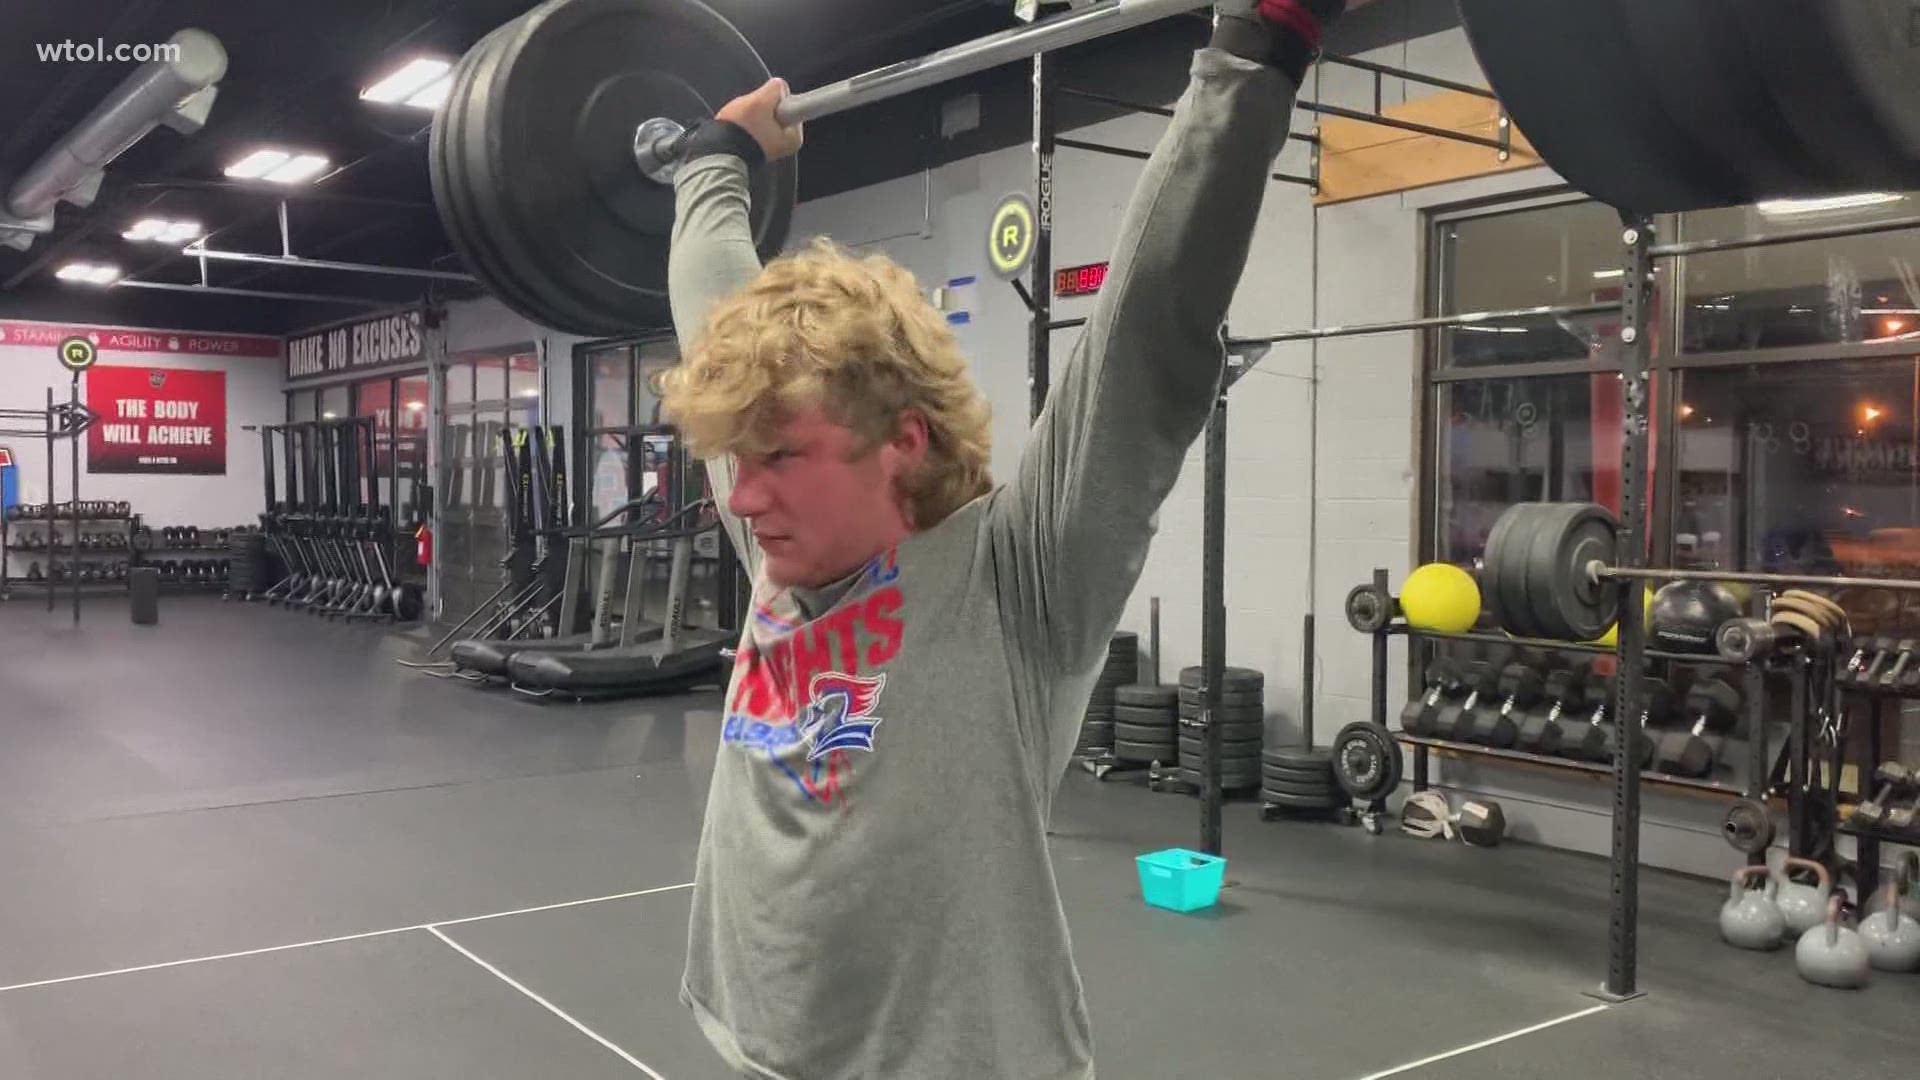 Will Heller, a senior at St. Francis, broke a school weightlifting record of 540 lbs. He's headed to Northern Michigan to continue his career, with Olympic dreams.